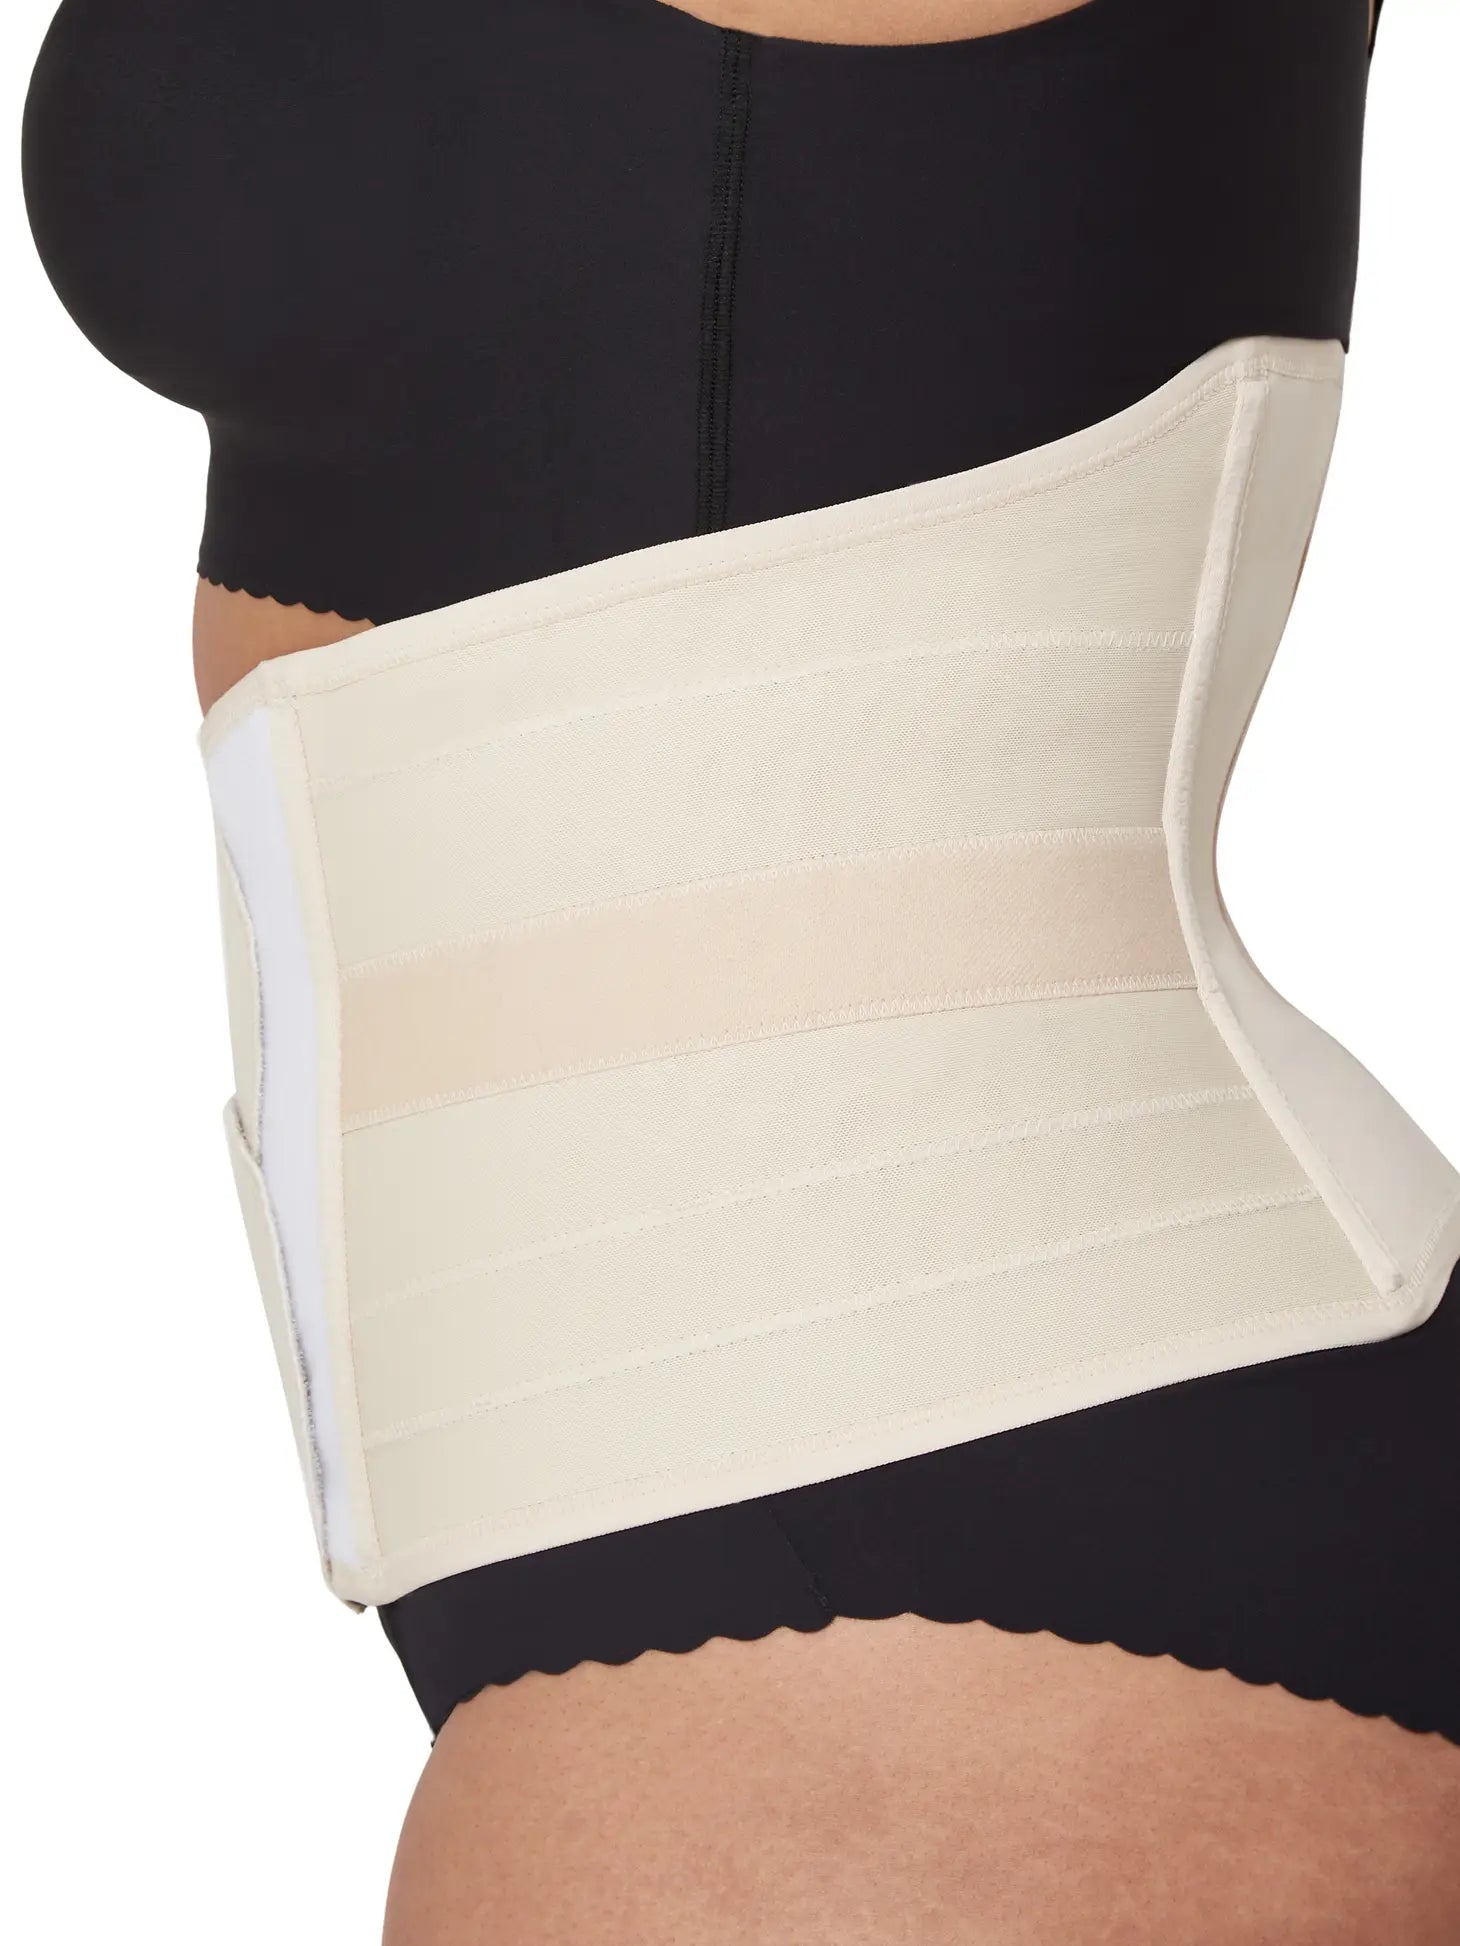 Petite - Luxe Belly Wrap - Nude